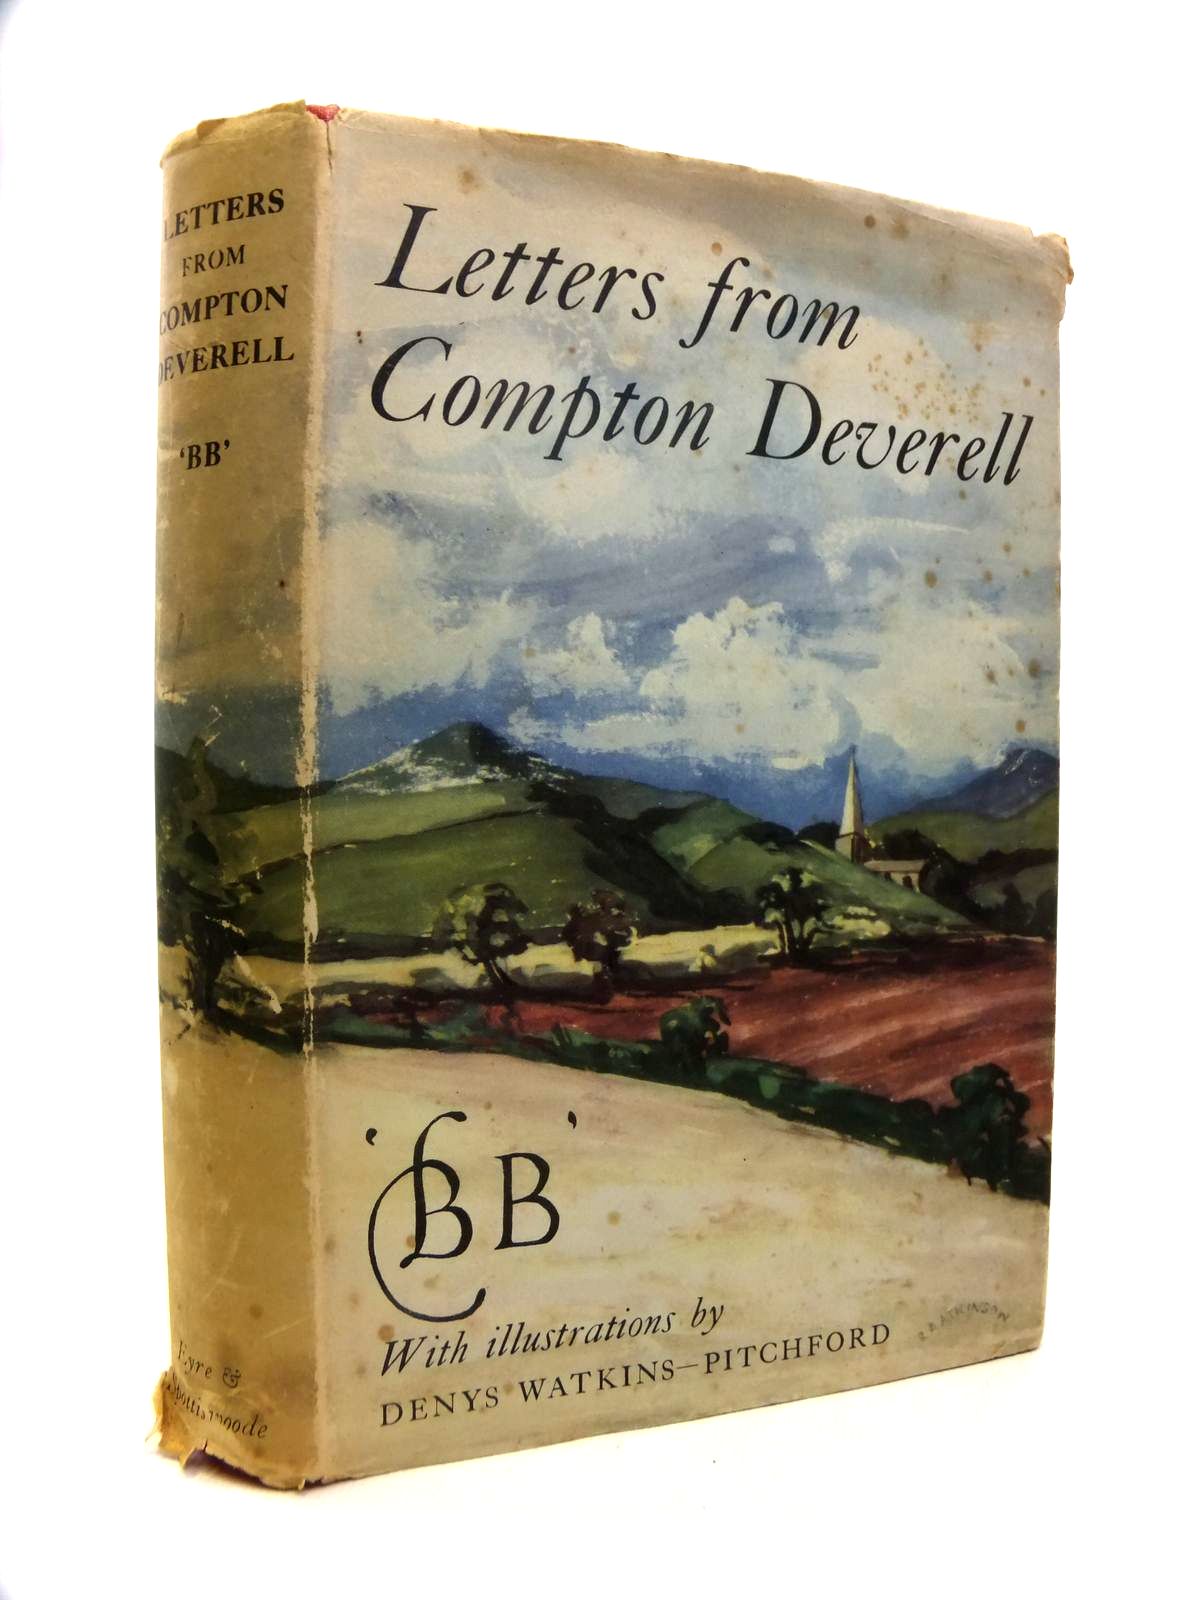 Cover of LETTERS FROM COMPTON DEVERELL by  BB